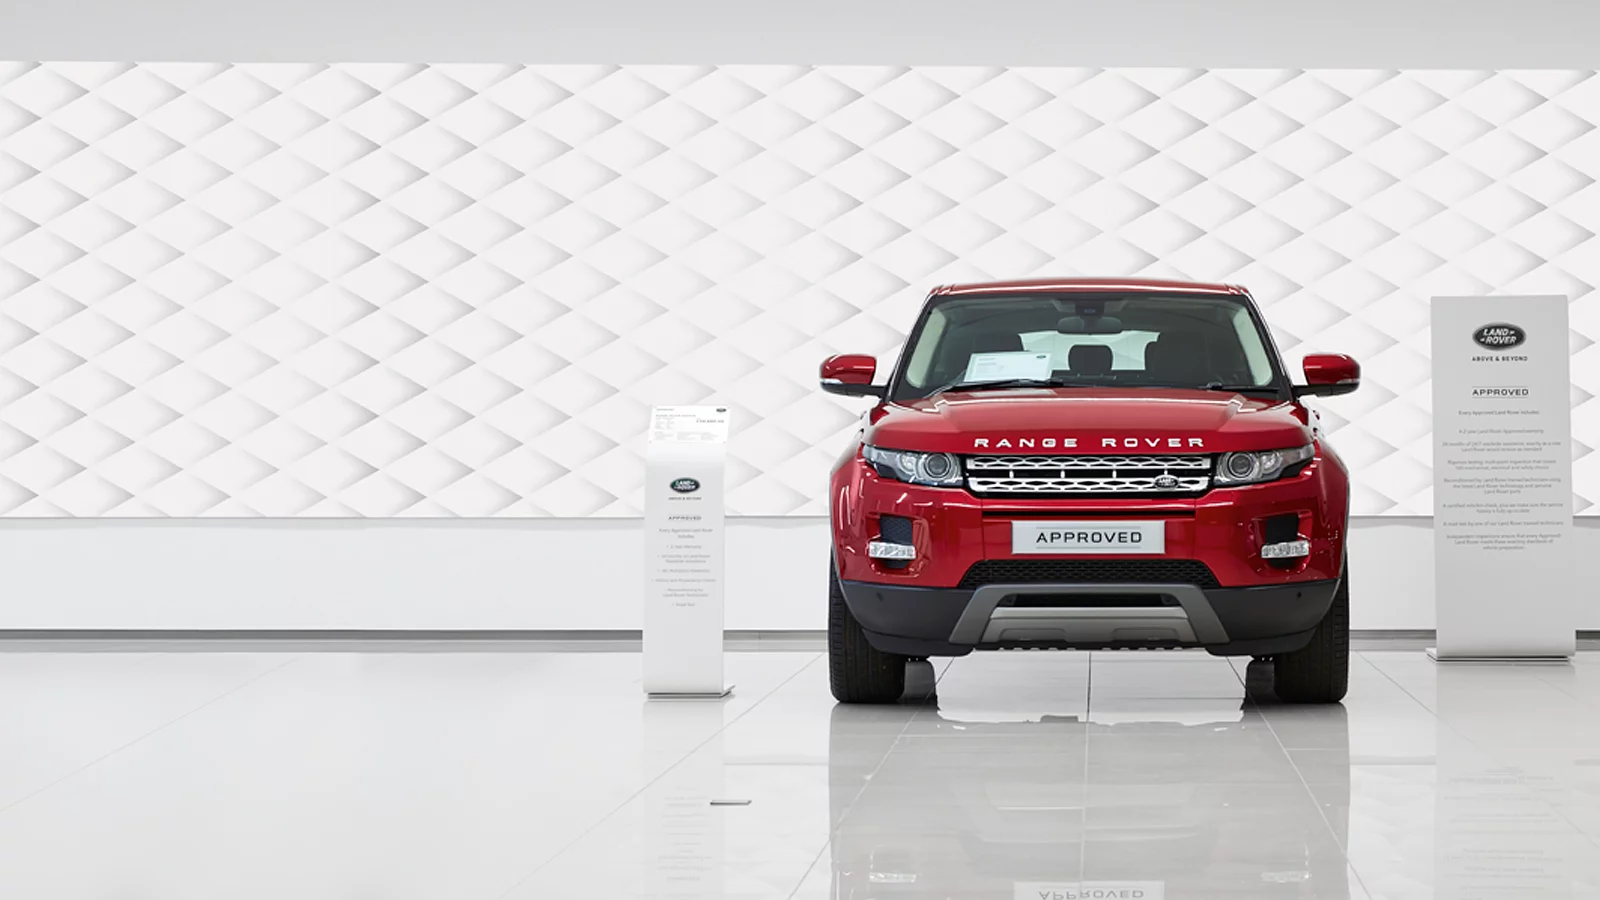 THE LAND ROVER APPROVED PROMISE